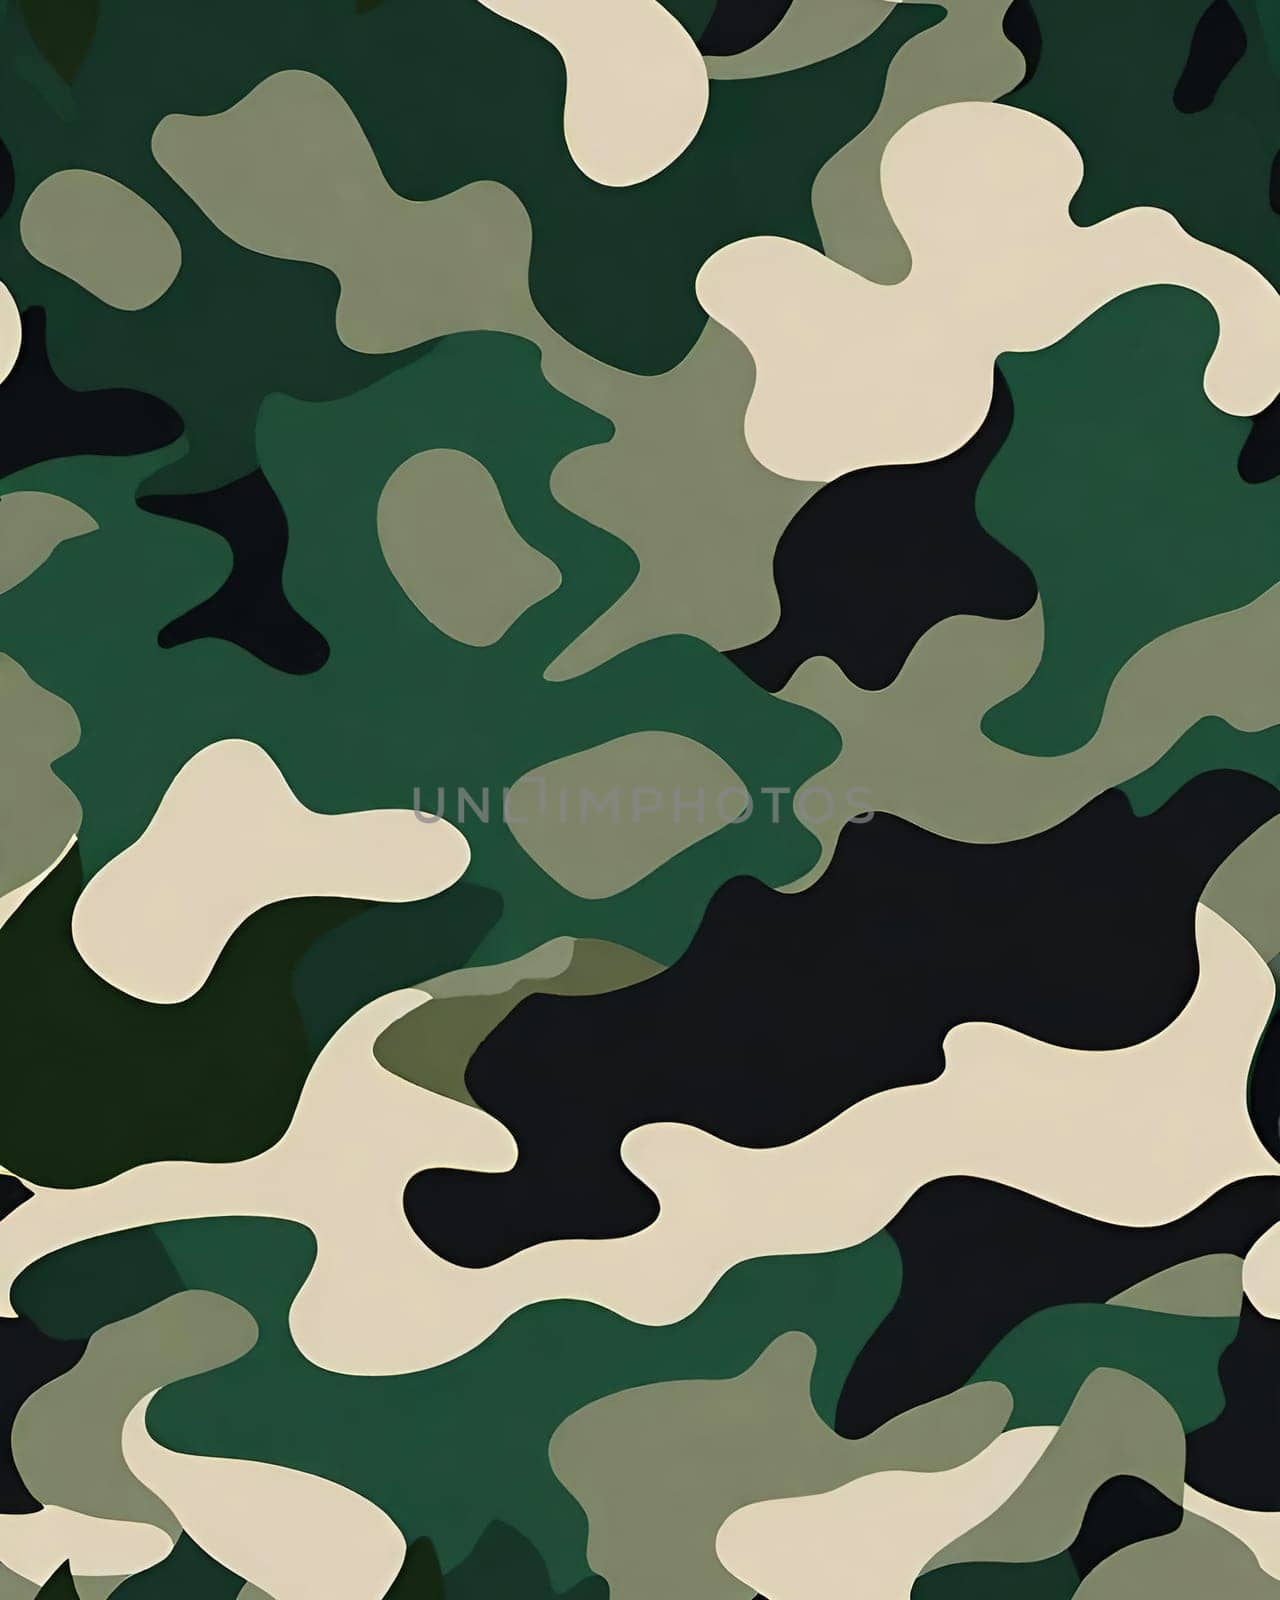 Camouflage Seamless Pattern. Classic clothing style masking camo repeat print. Green, brown, black colors. Vector illustration.Classic clothing style masking camo repeat print.